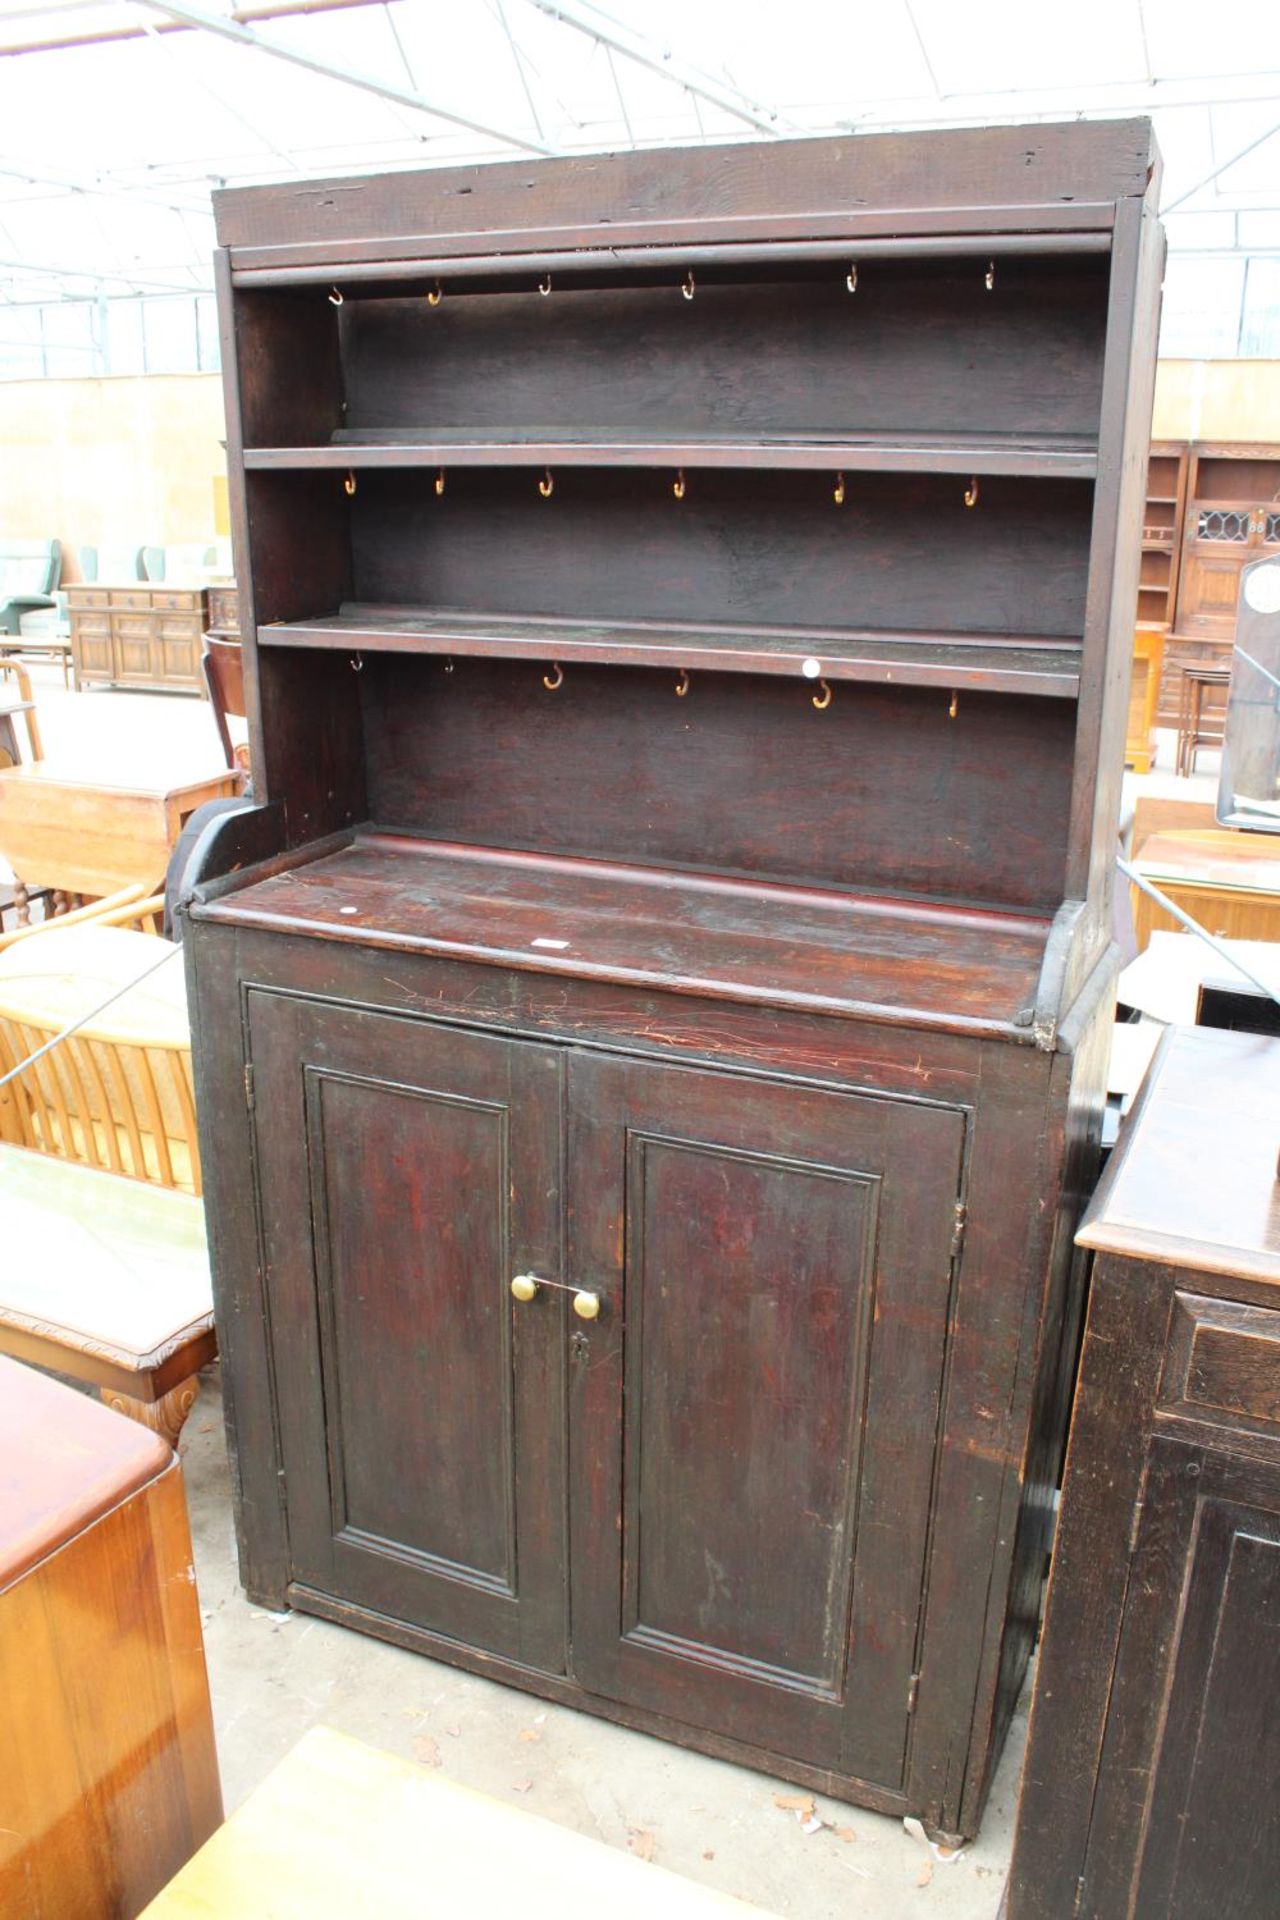 A LATE VICTORIAN PINE KITCHEN DRESSER WITH 2 CUPBOARDS TO BASE AND PLATE RACK, 43" WIDE